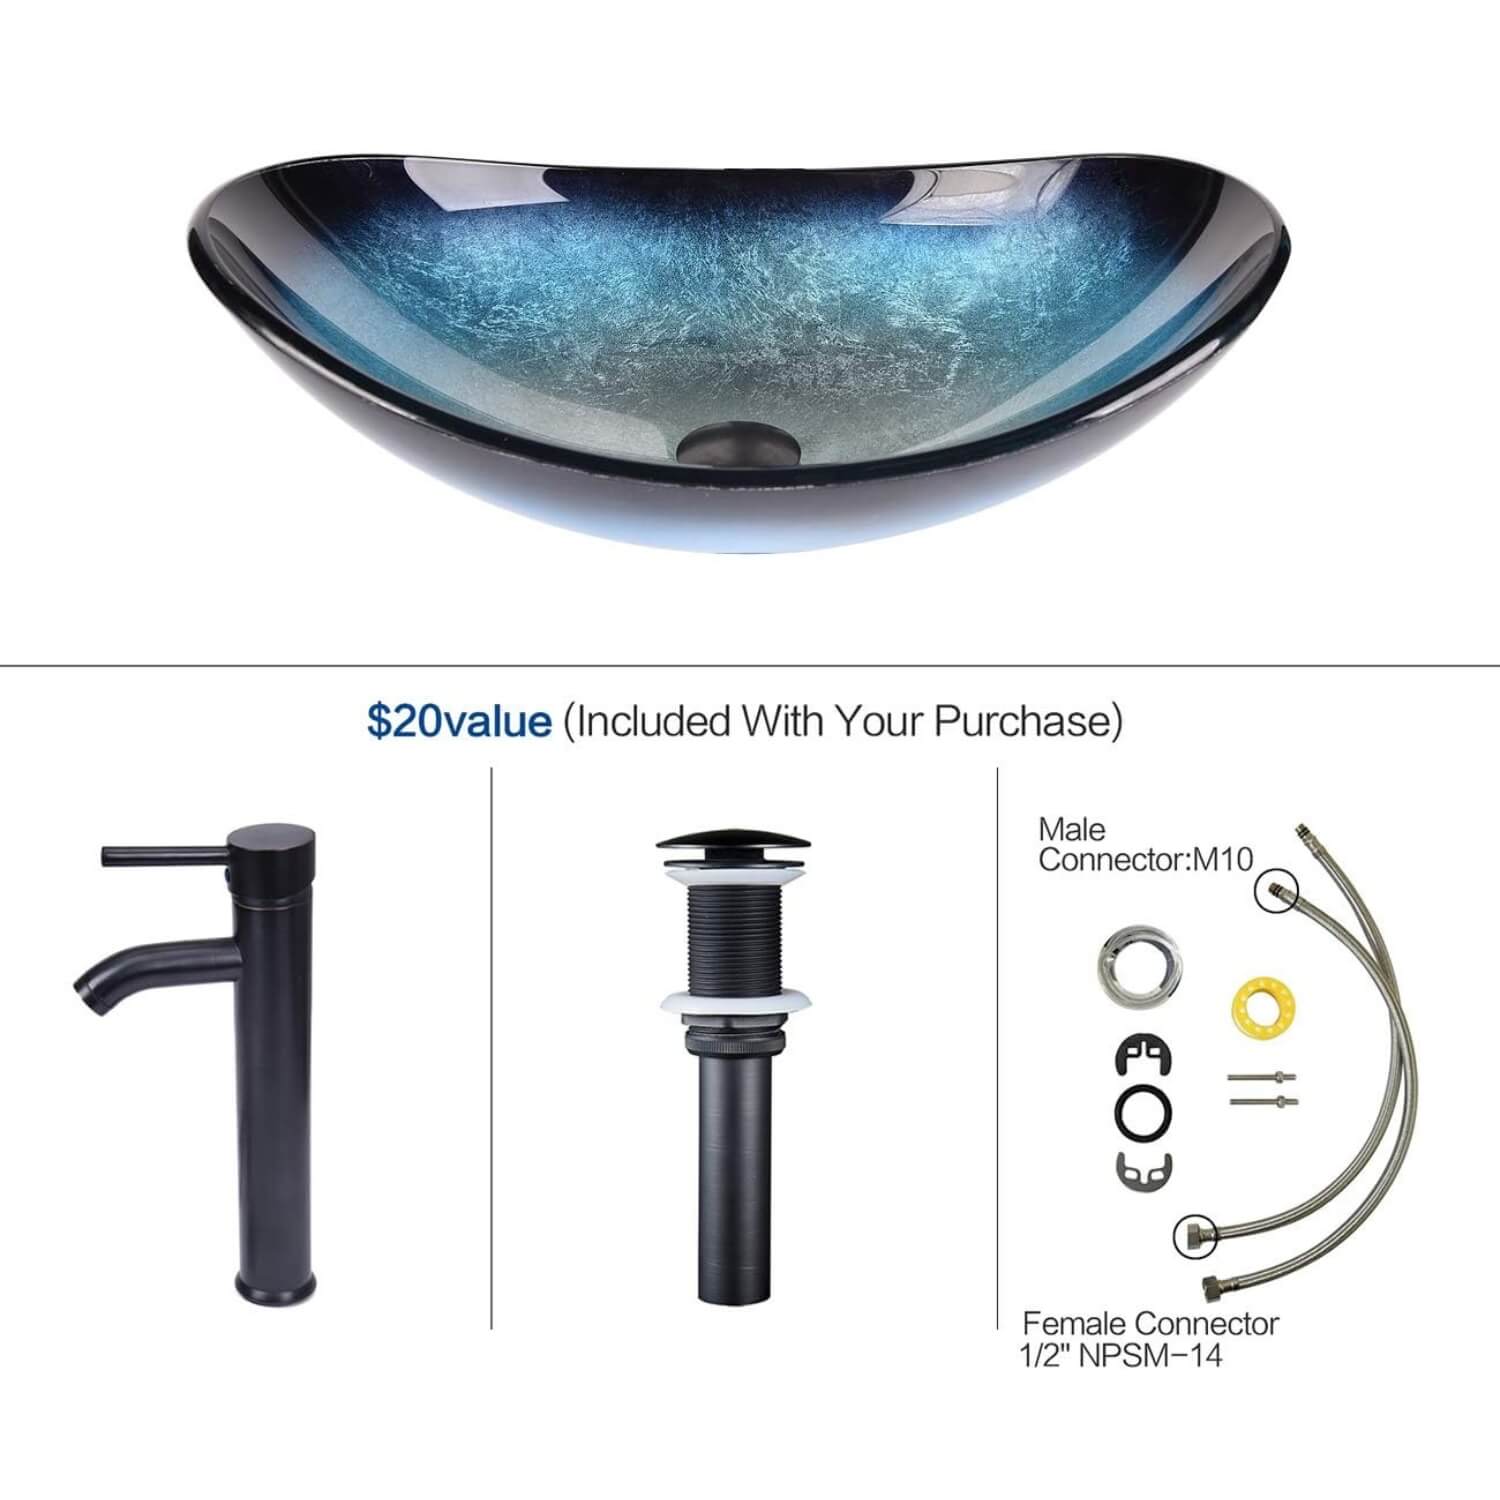 Elecwish blue boat sink included parts